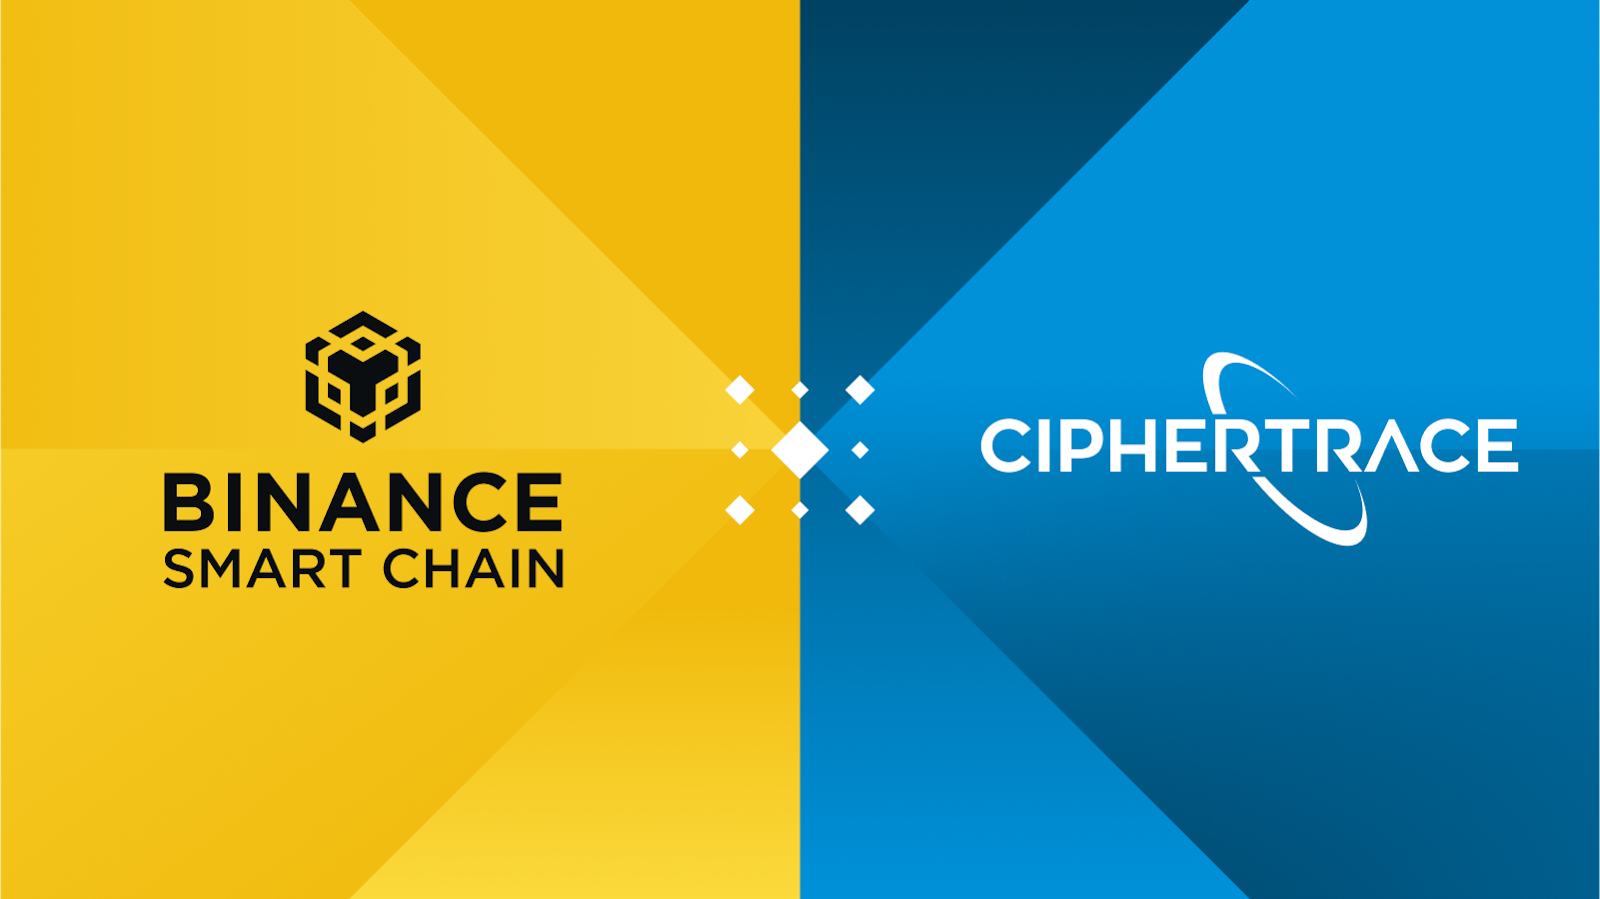 CipherTrace Adds Analytics Support for Binance Smart Chain to Track Illicit Transactions, Legitimizes Chain for More Partnership Opportunities